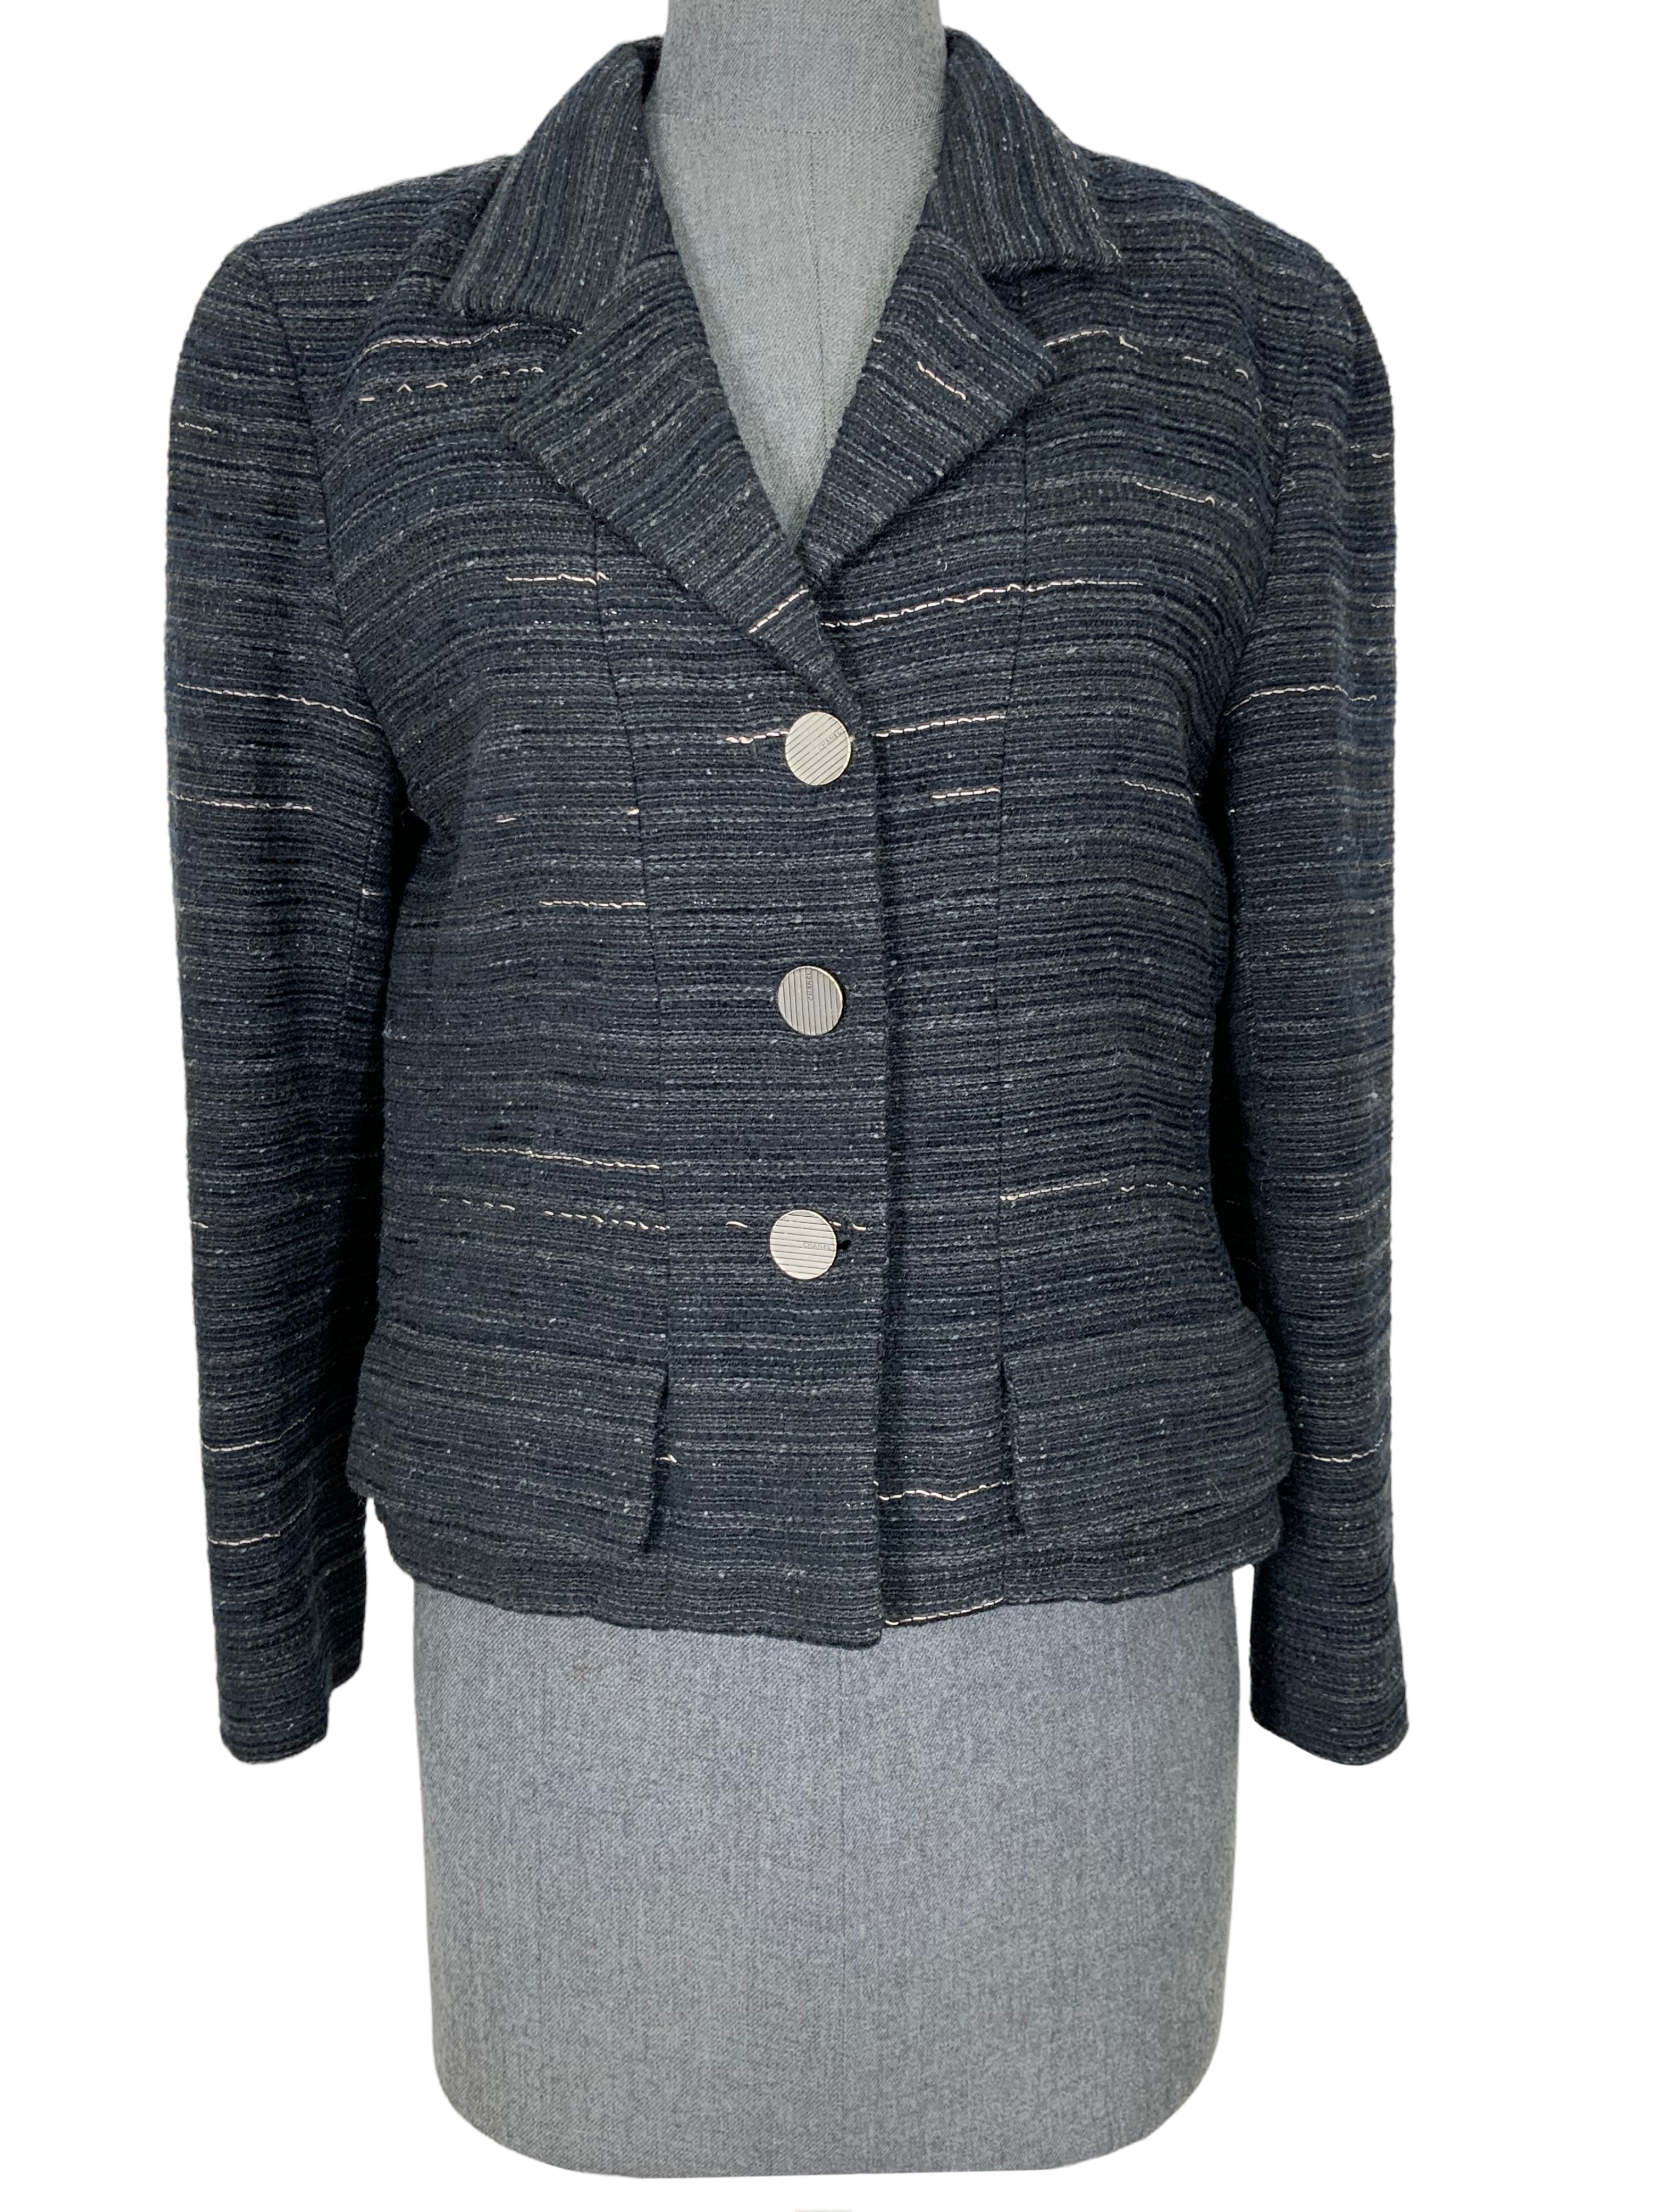 CHANEL 09A Vintage Cropped Wool Jacket Size M - Consigned Designs